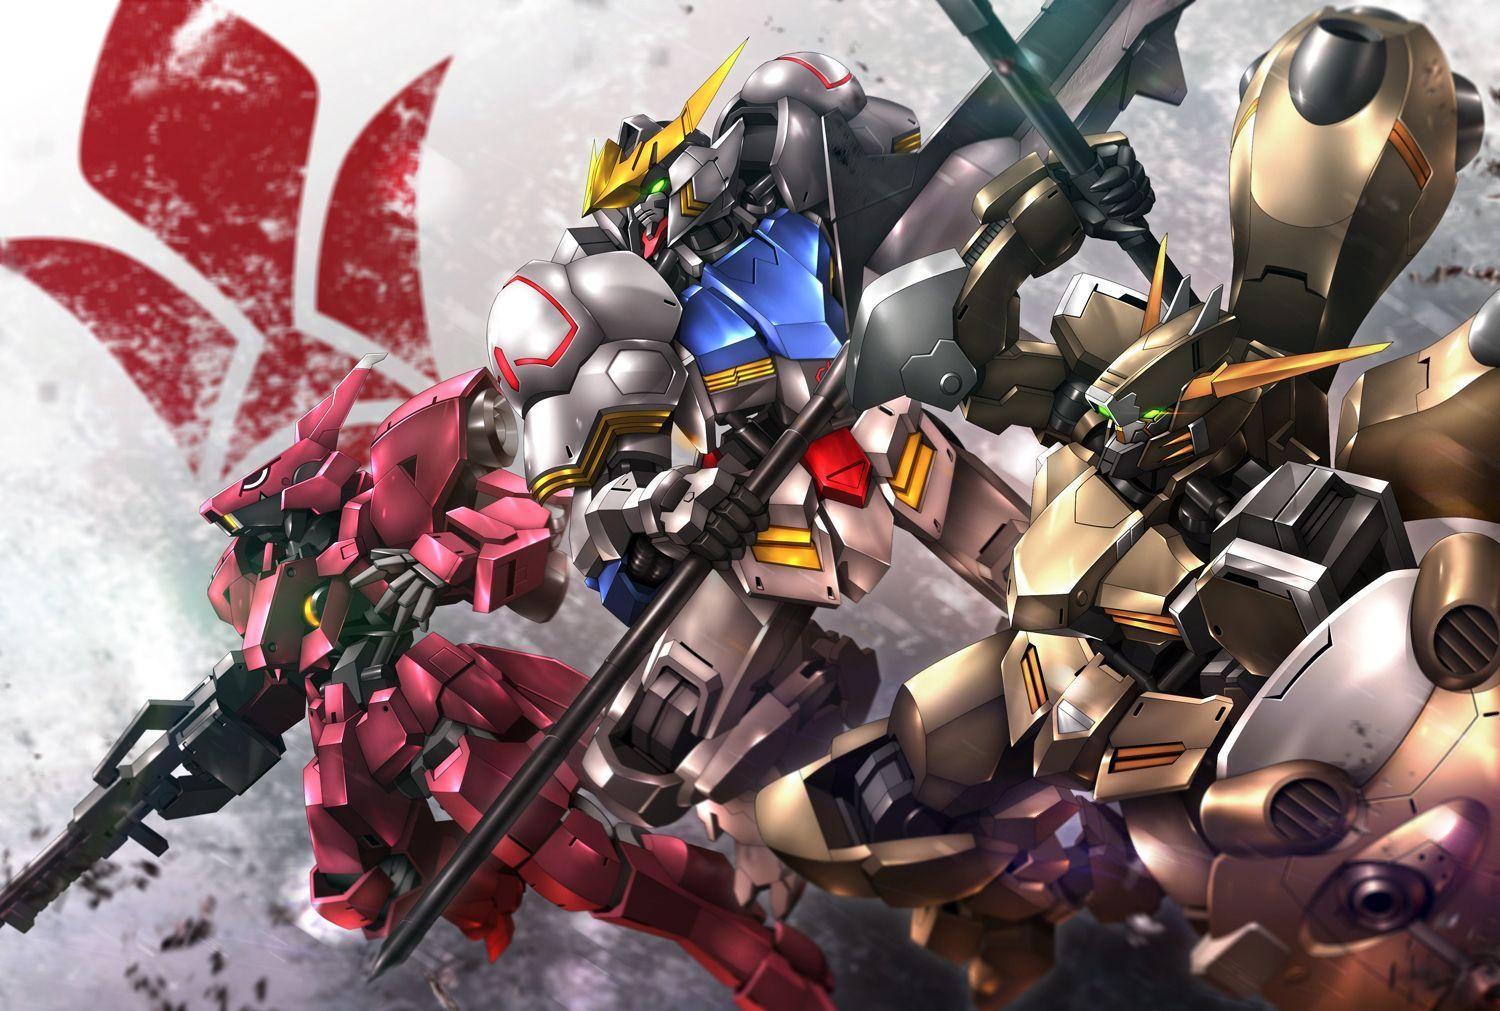 Mobile Suit Gundam Iron Blooded Orphans Wallpapers.